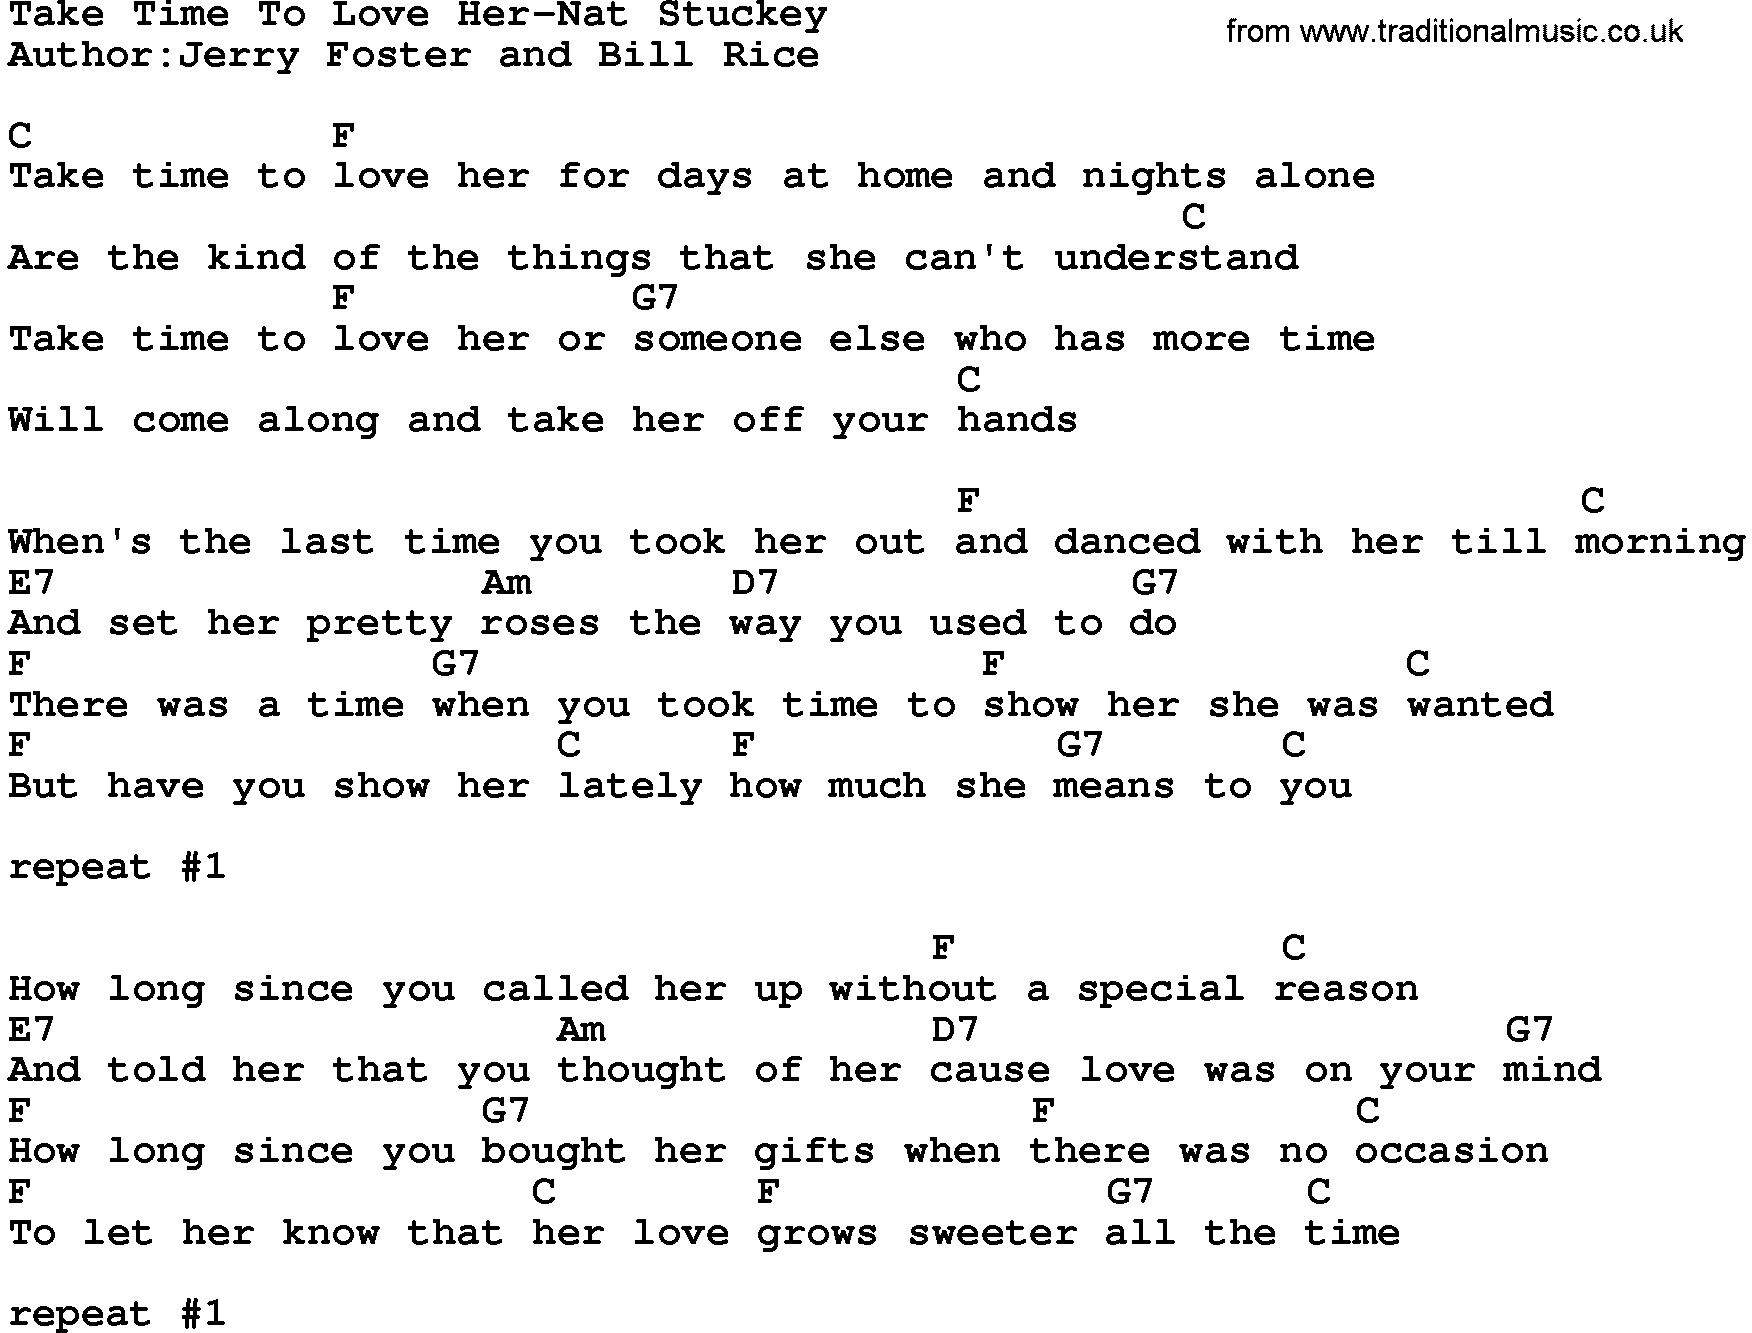 Country music song: Take Time To Love Her-Nat Stuckey lyrics and chords